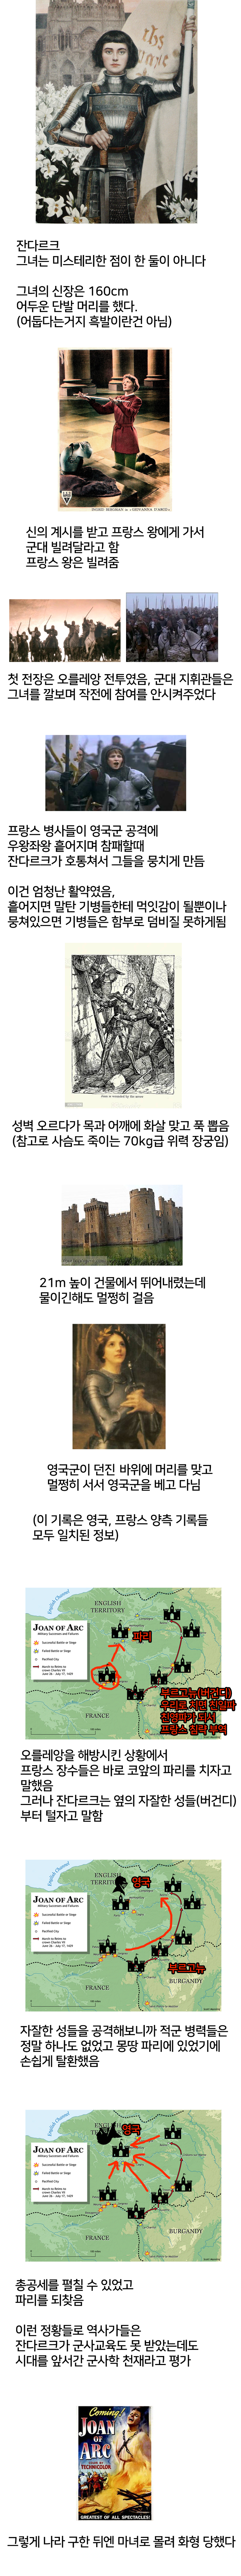 The reason why Joan of Arc is suspected as a fantasy even though it's history.jpg